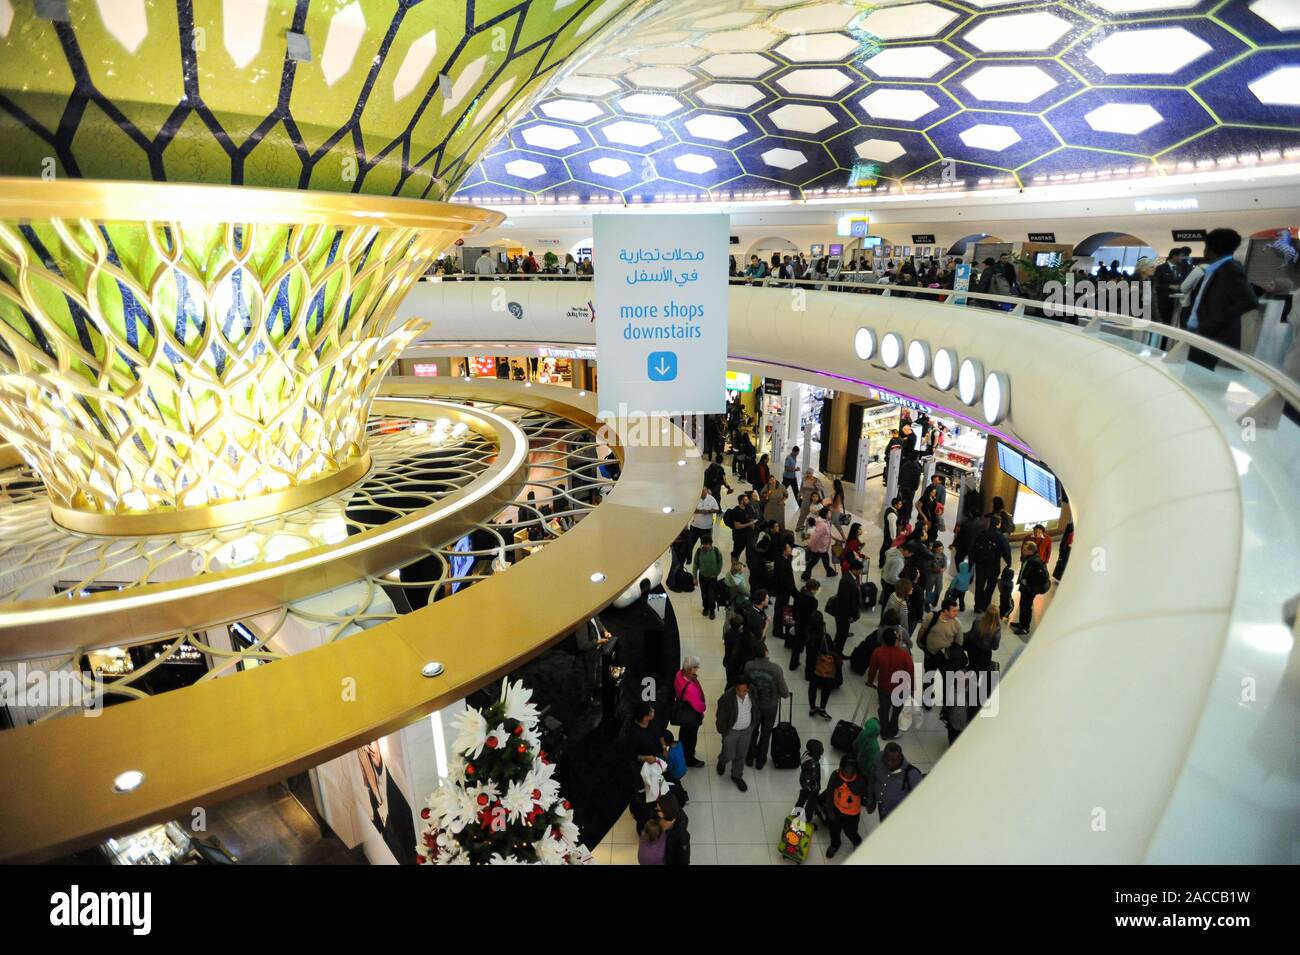 04.01.2014, Abu Dhabi, United Arab Emirates - Interior view of the transit hall with duty free shops inside the old terminal at the airport. Stock Photo